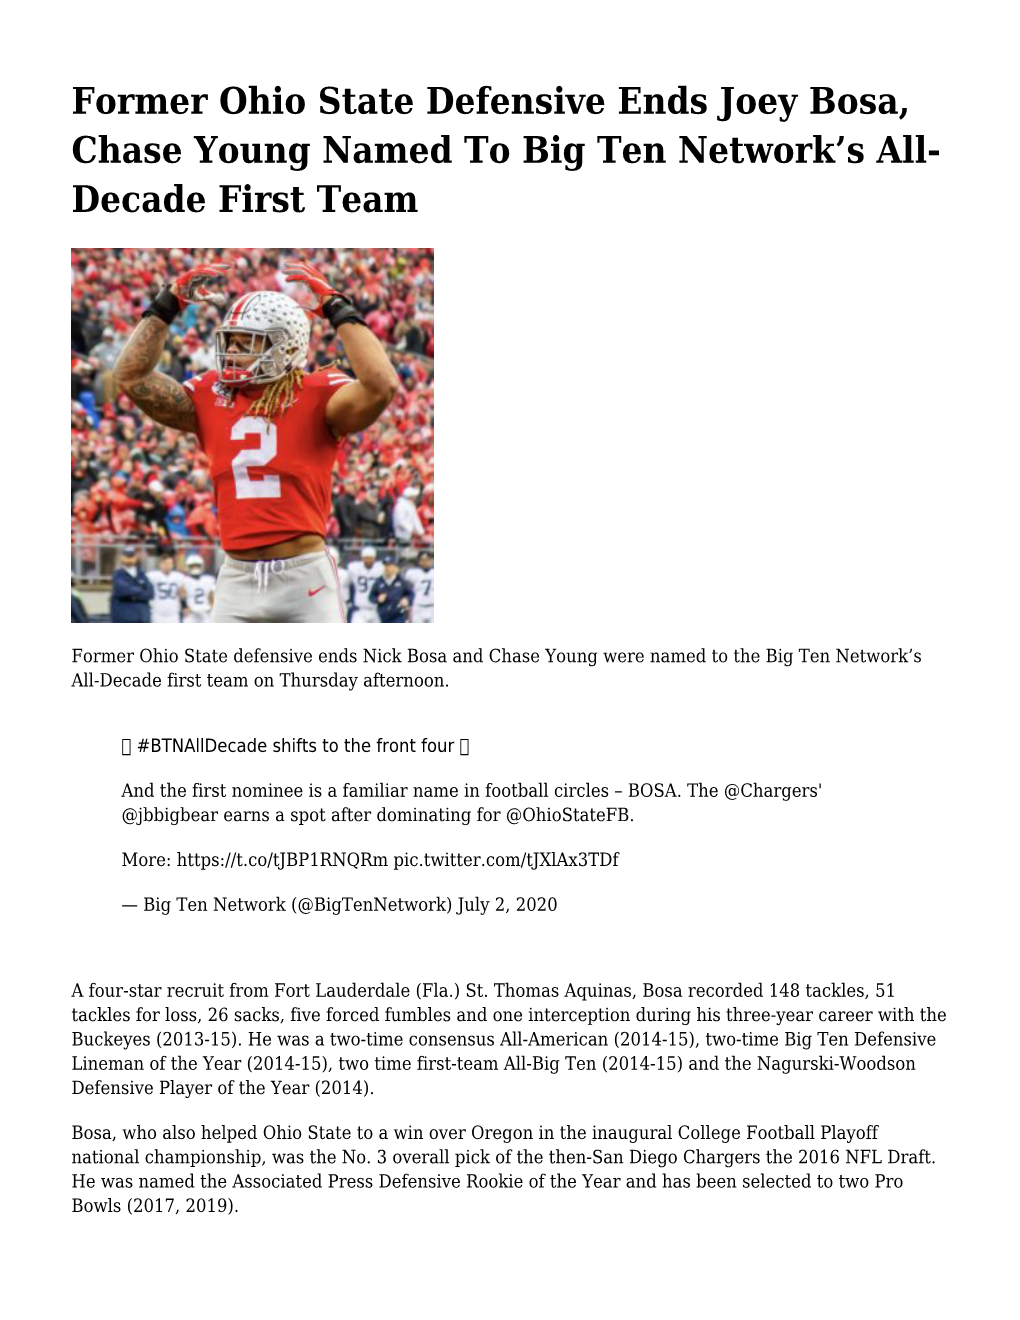 Former Ohio State Defensive Ends Joey Bosa, Chase Young Named to Big Ten Network’S All- Decade First Team